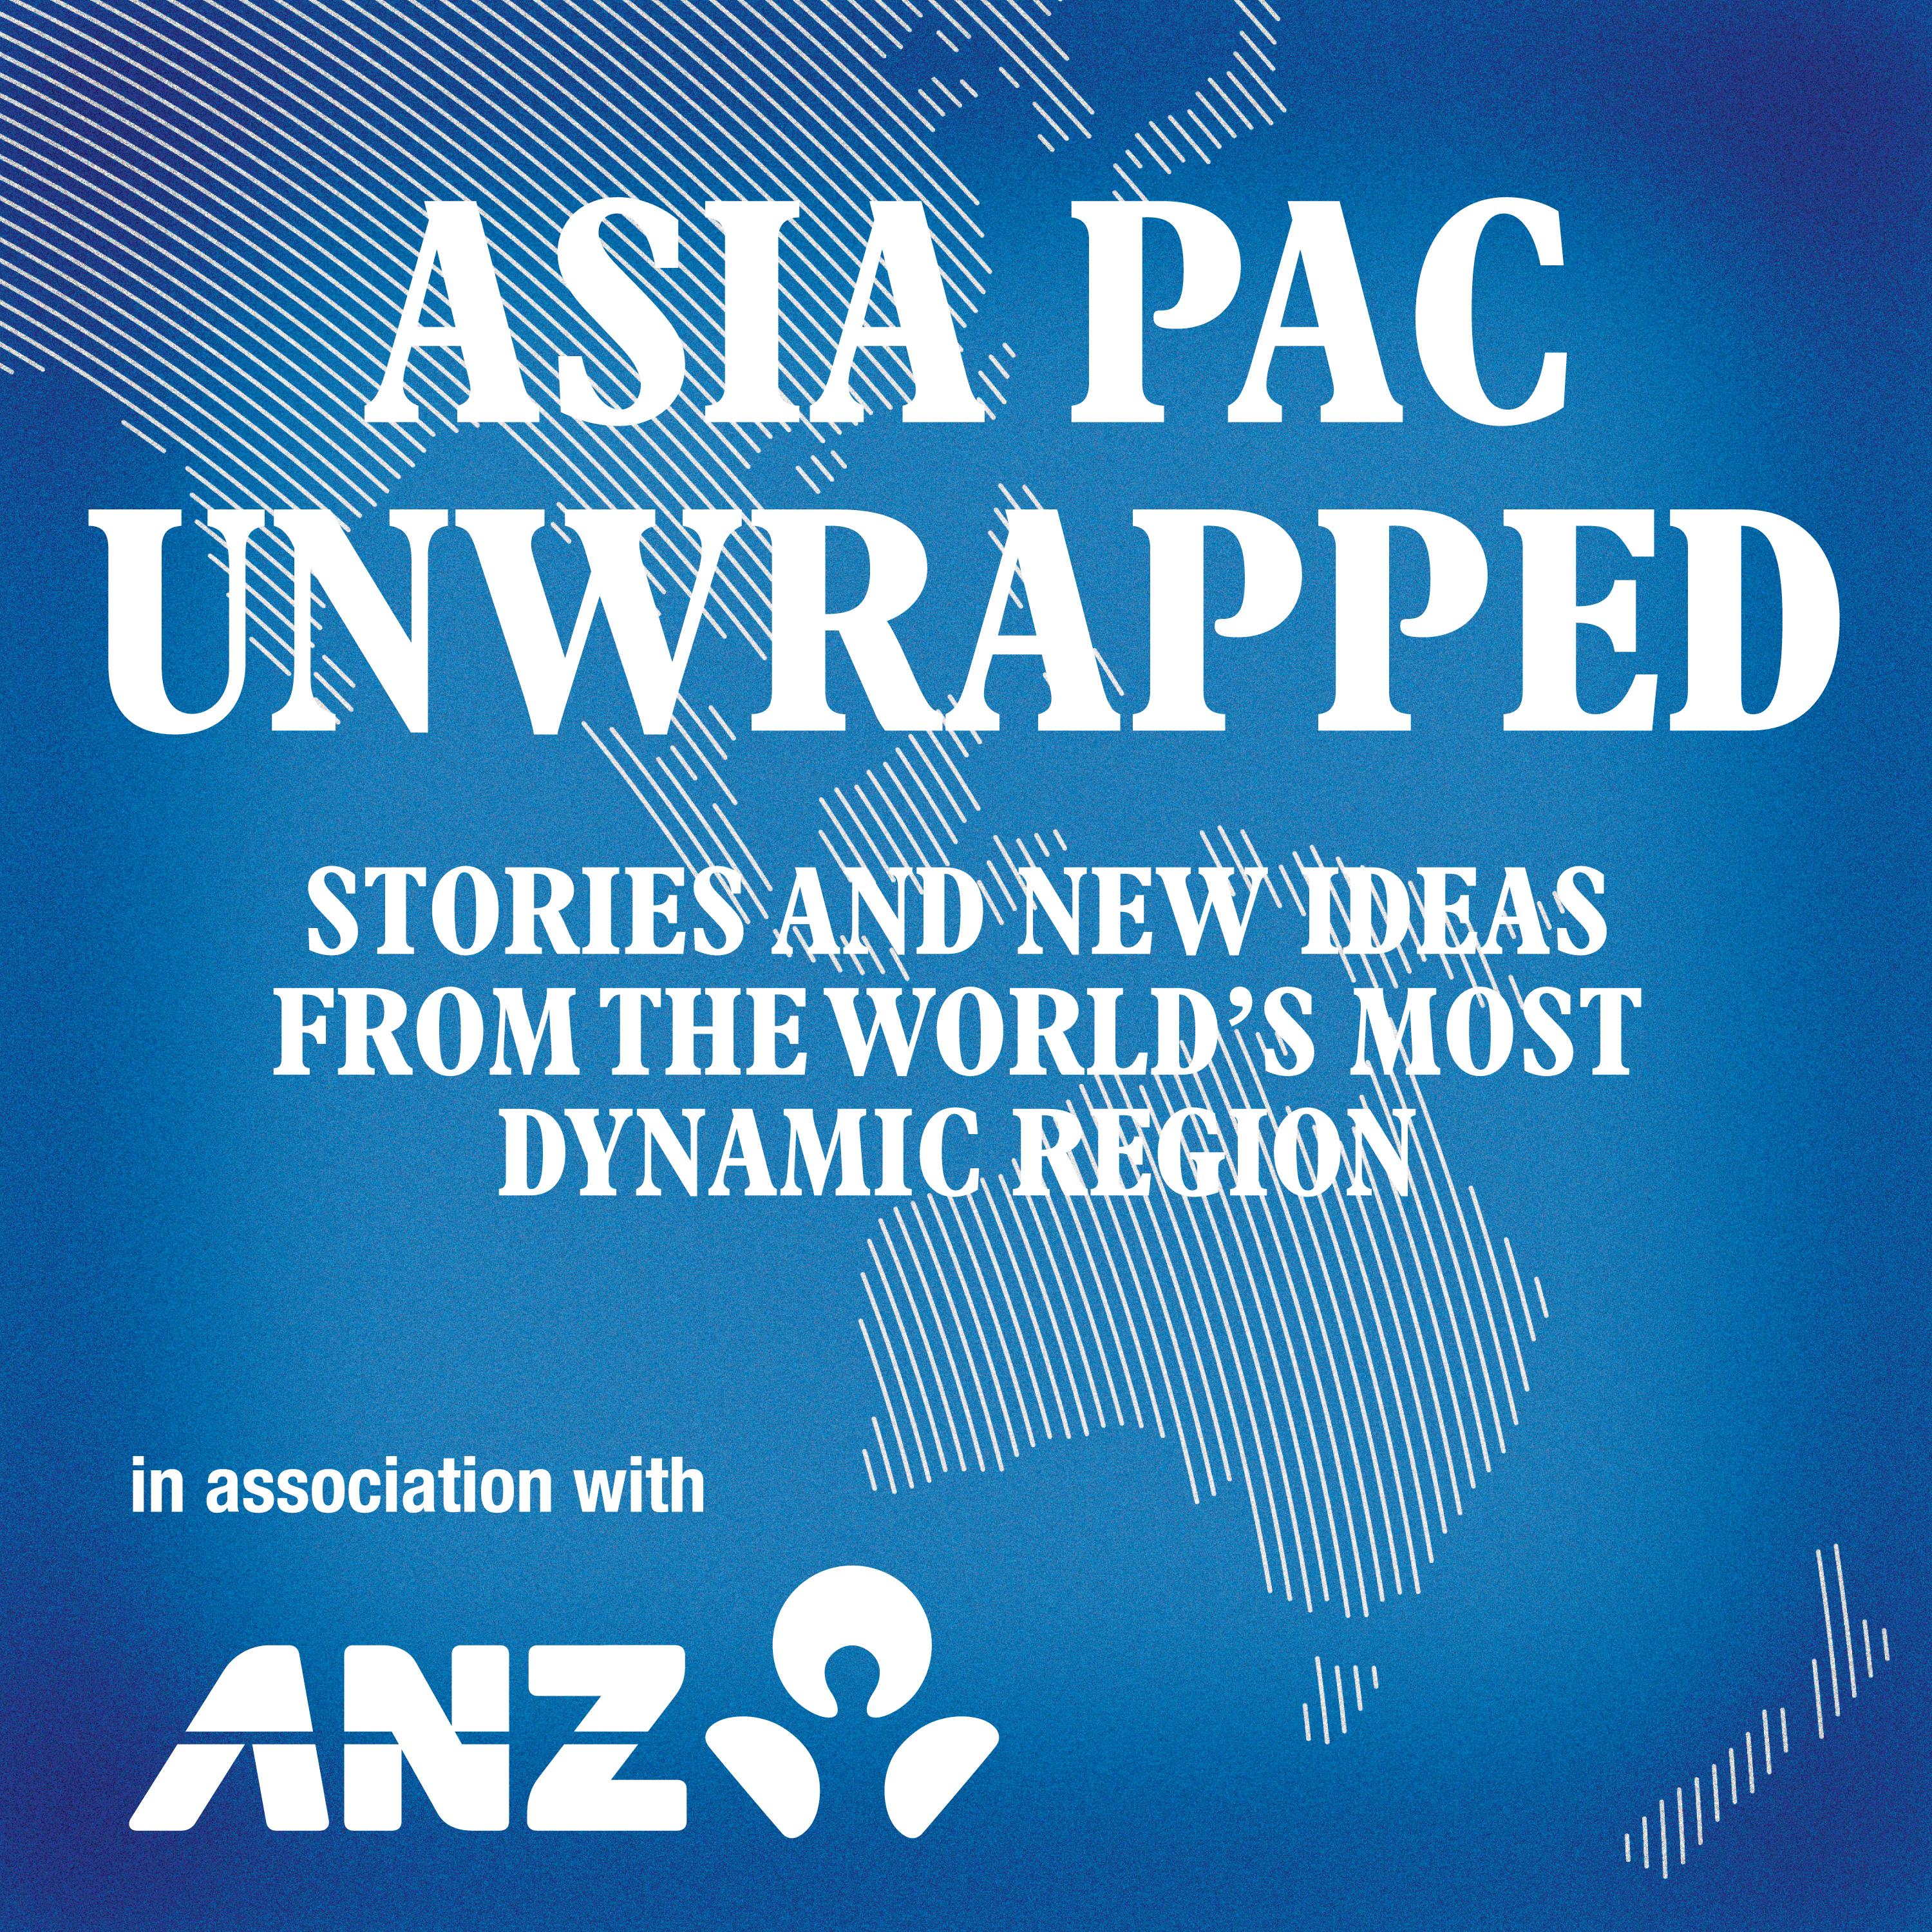 Asia Pac Unwrapped